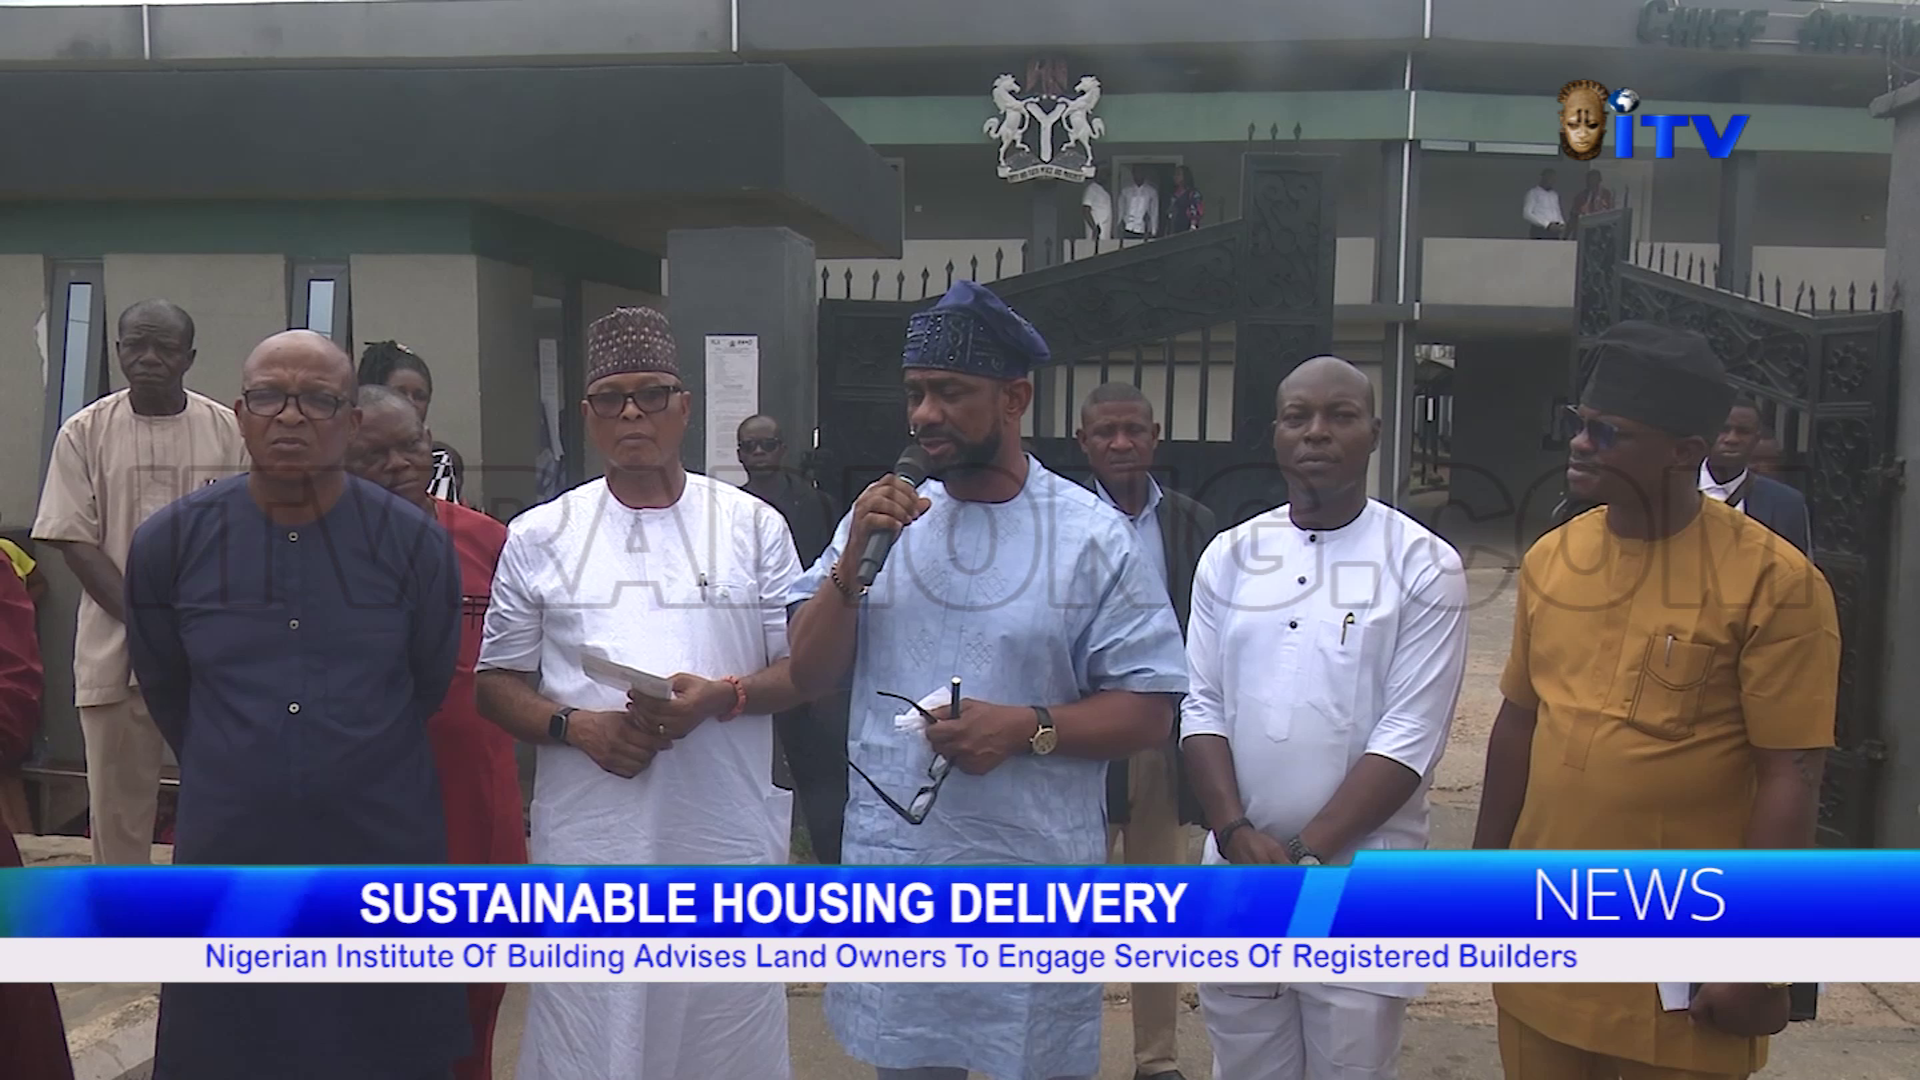 Nigerian Institute Of Building Advises Land Owners To Engage Services Of Registered Builders